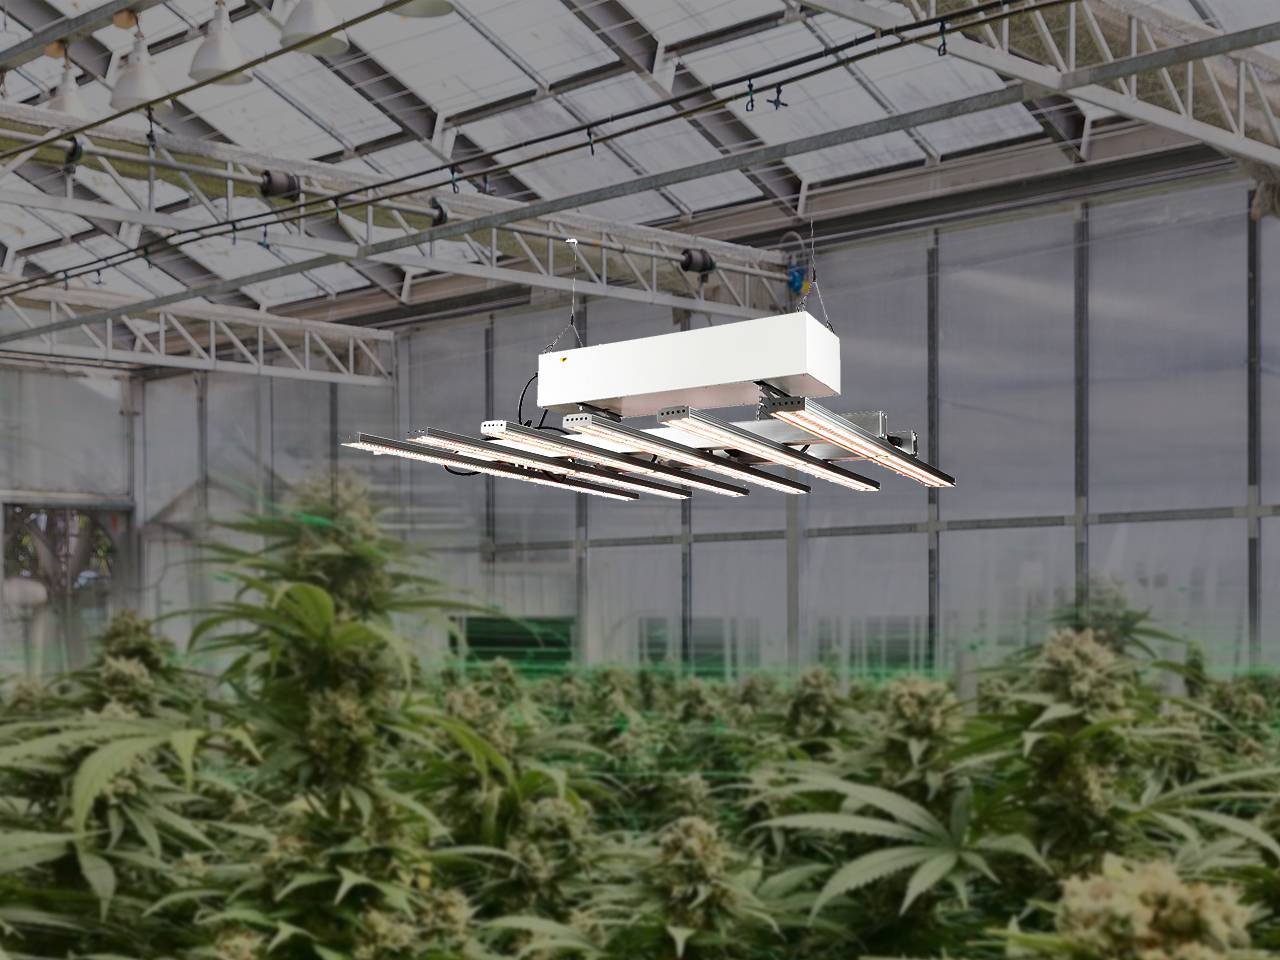 Automatically up and down, intelligent plant cultivation!